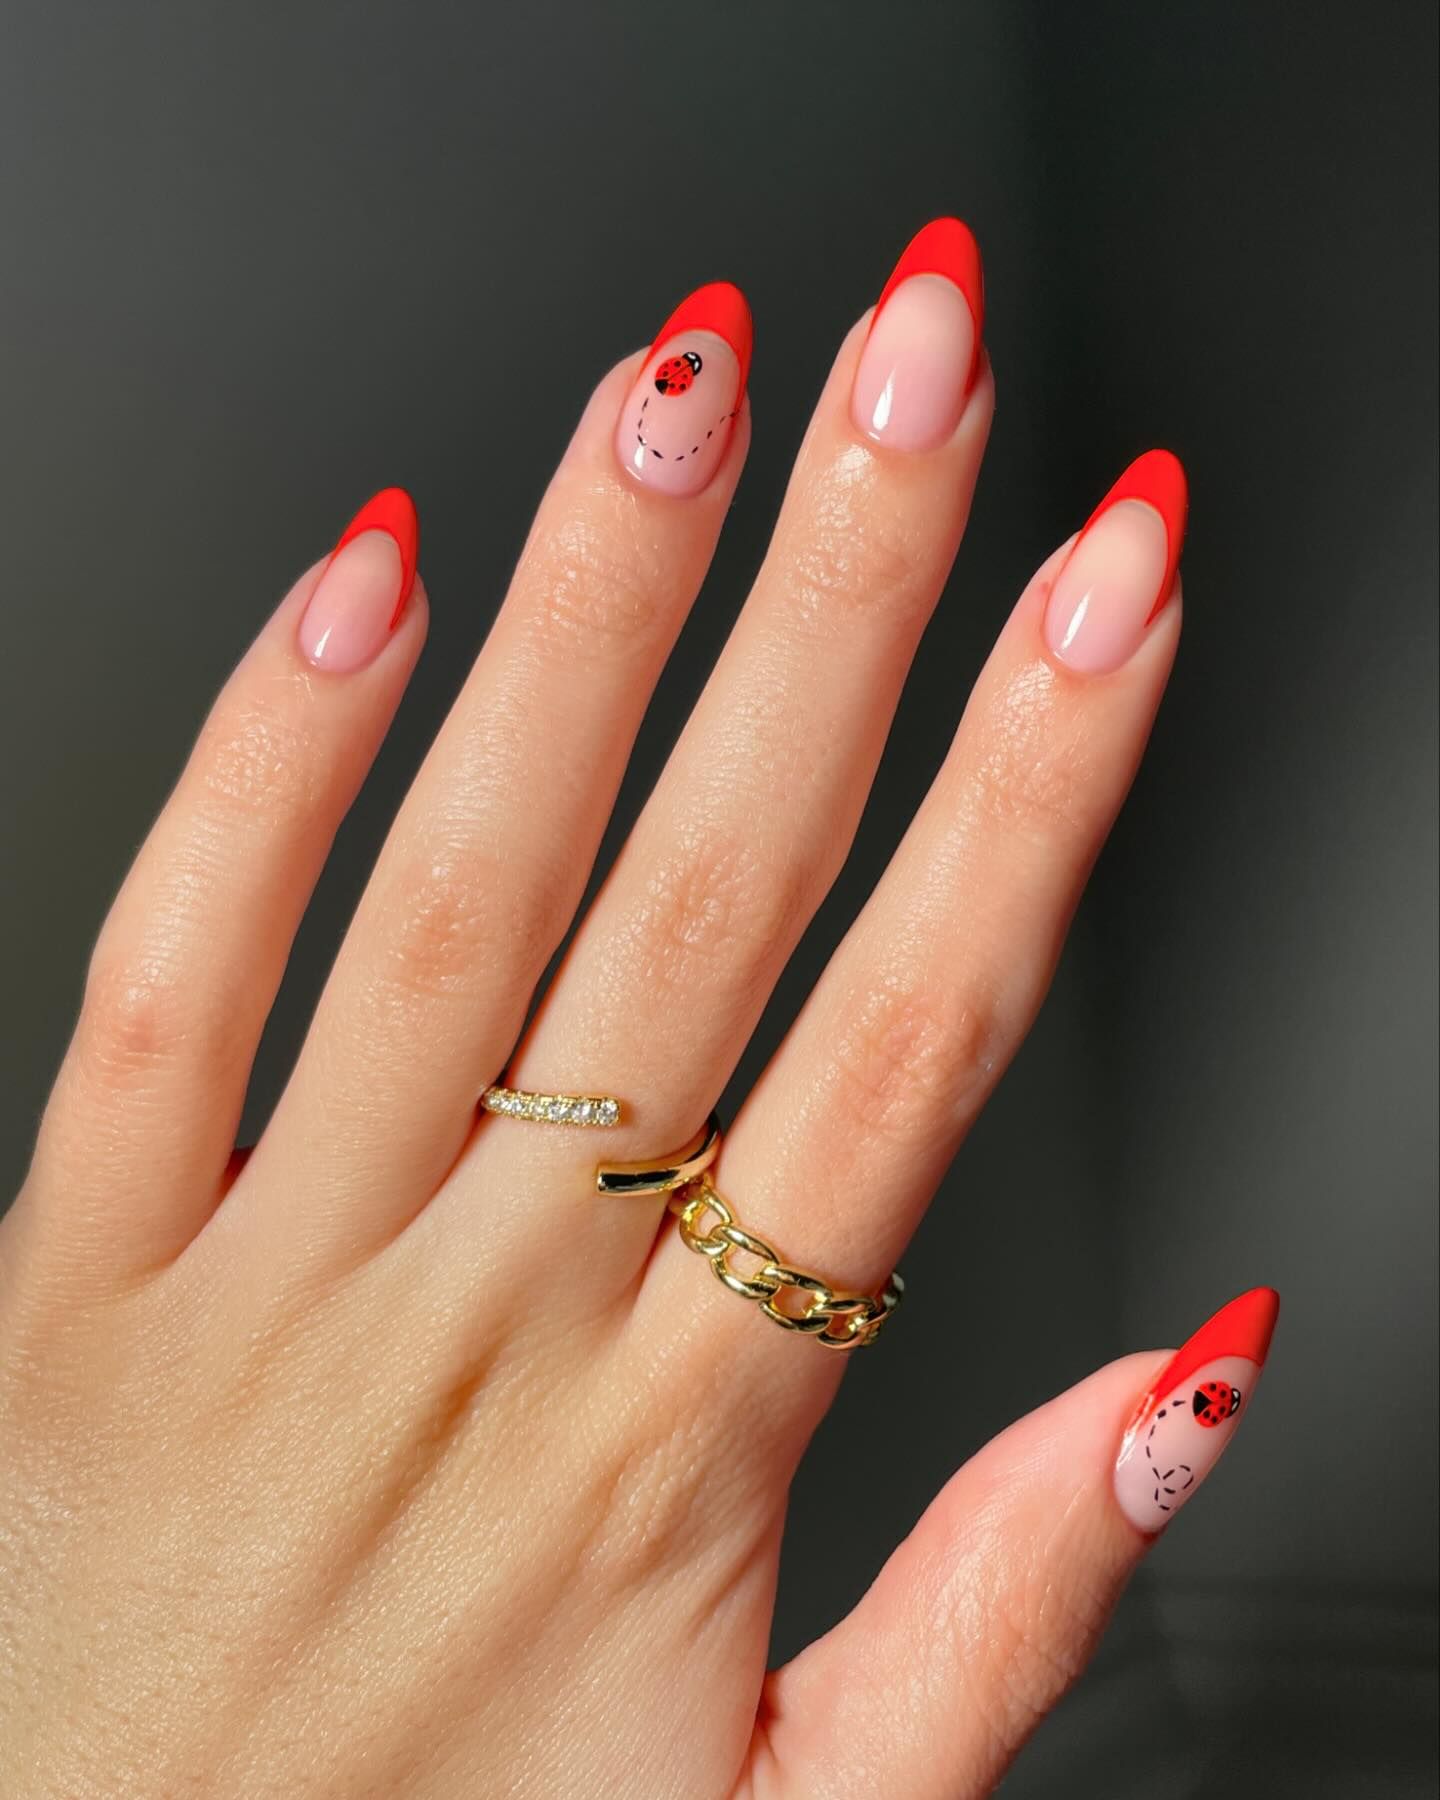 100+ Short Nail Designs You’ll Want To Try This Year images 86